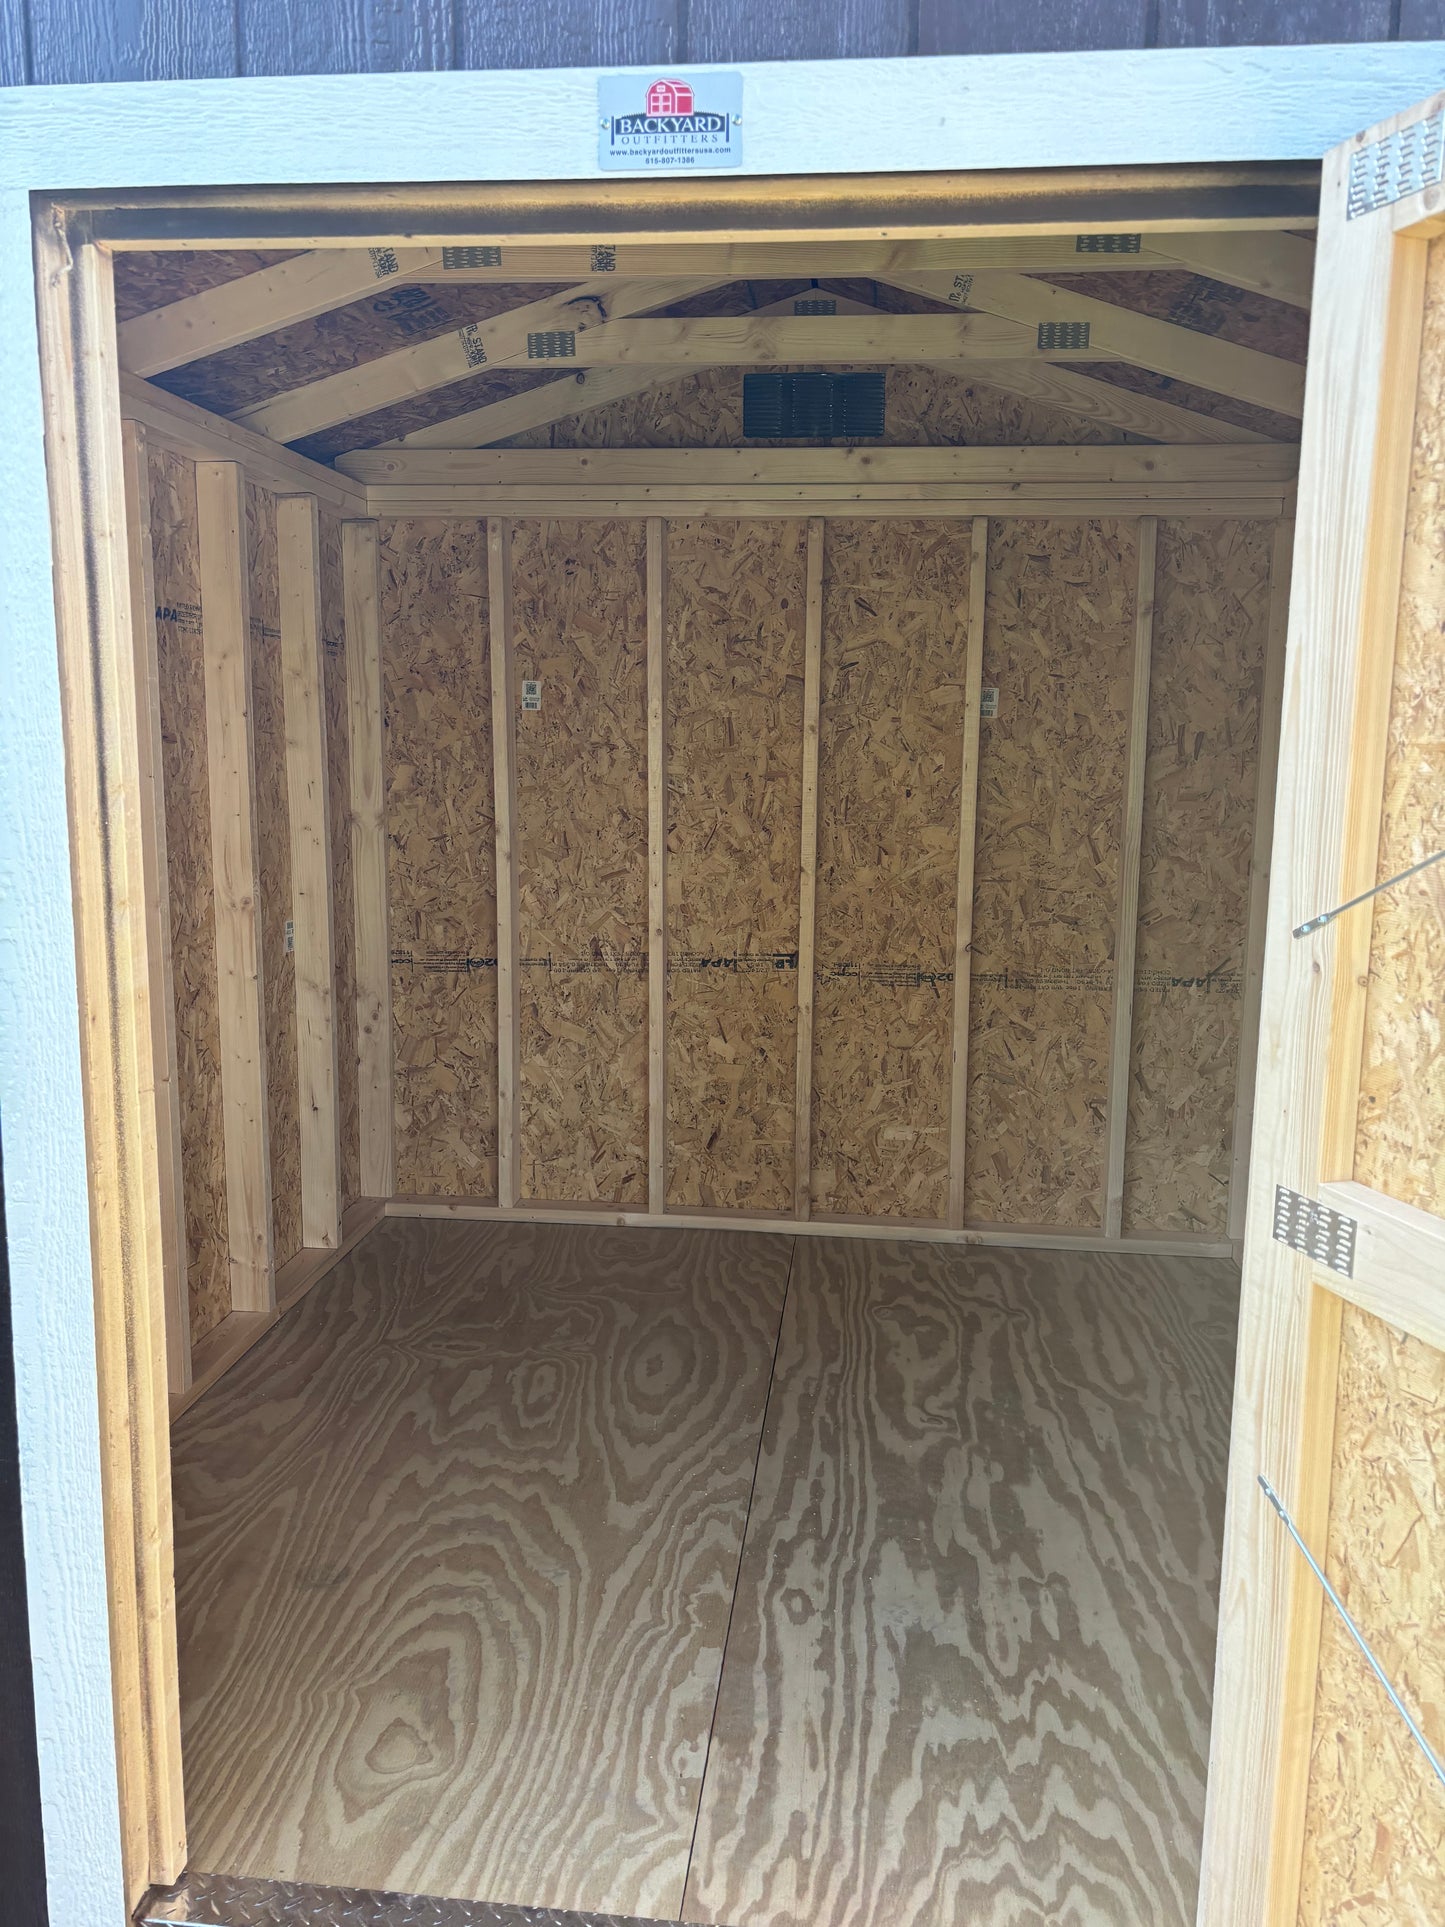 8x8 Utility Shed 71205